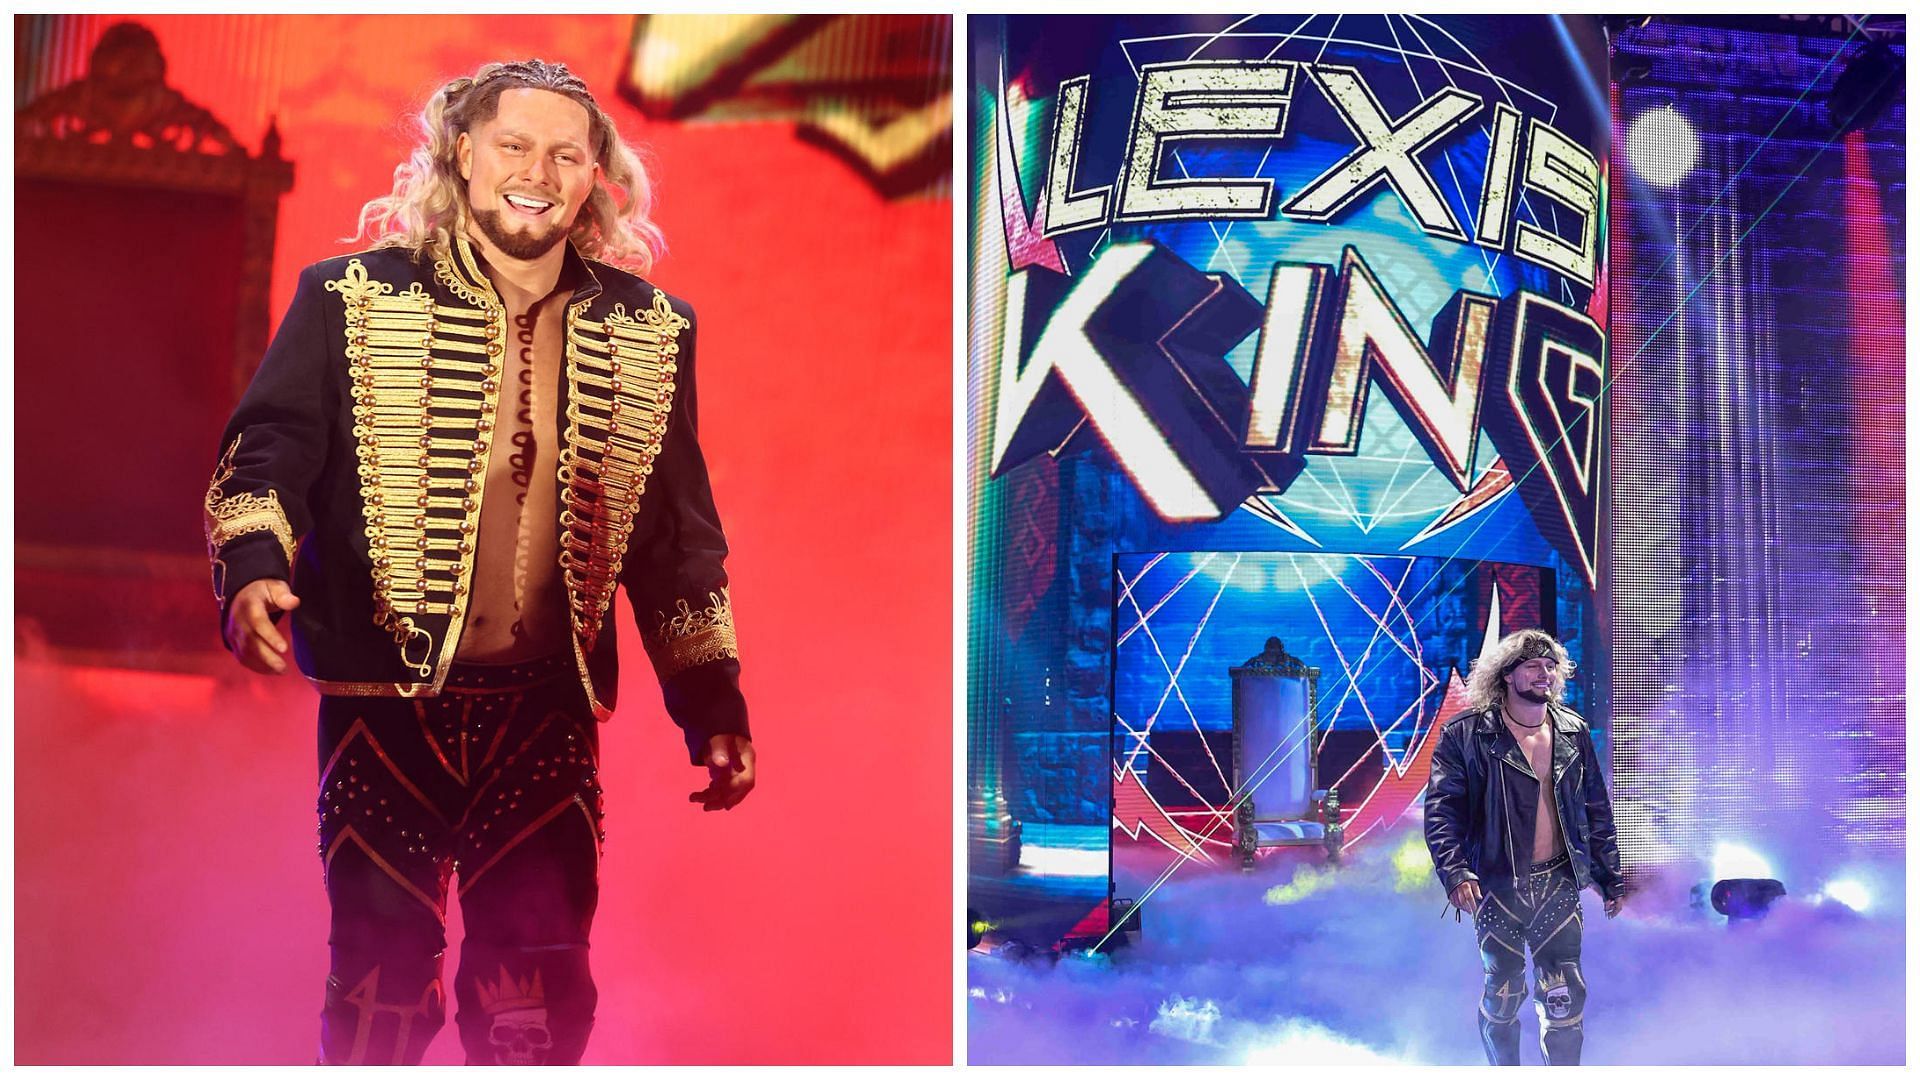 Lexis King is working on WWE NXT brand.